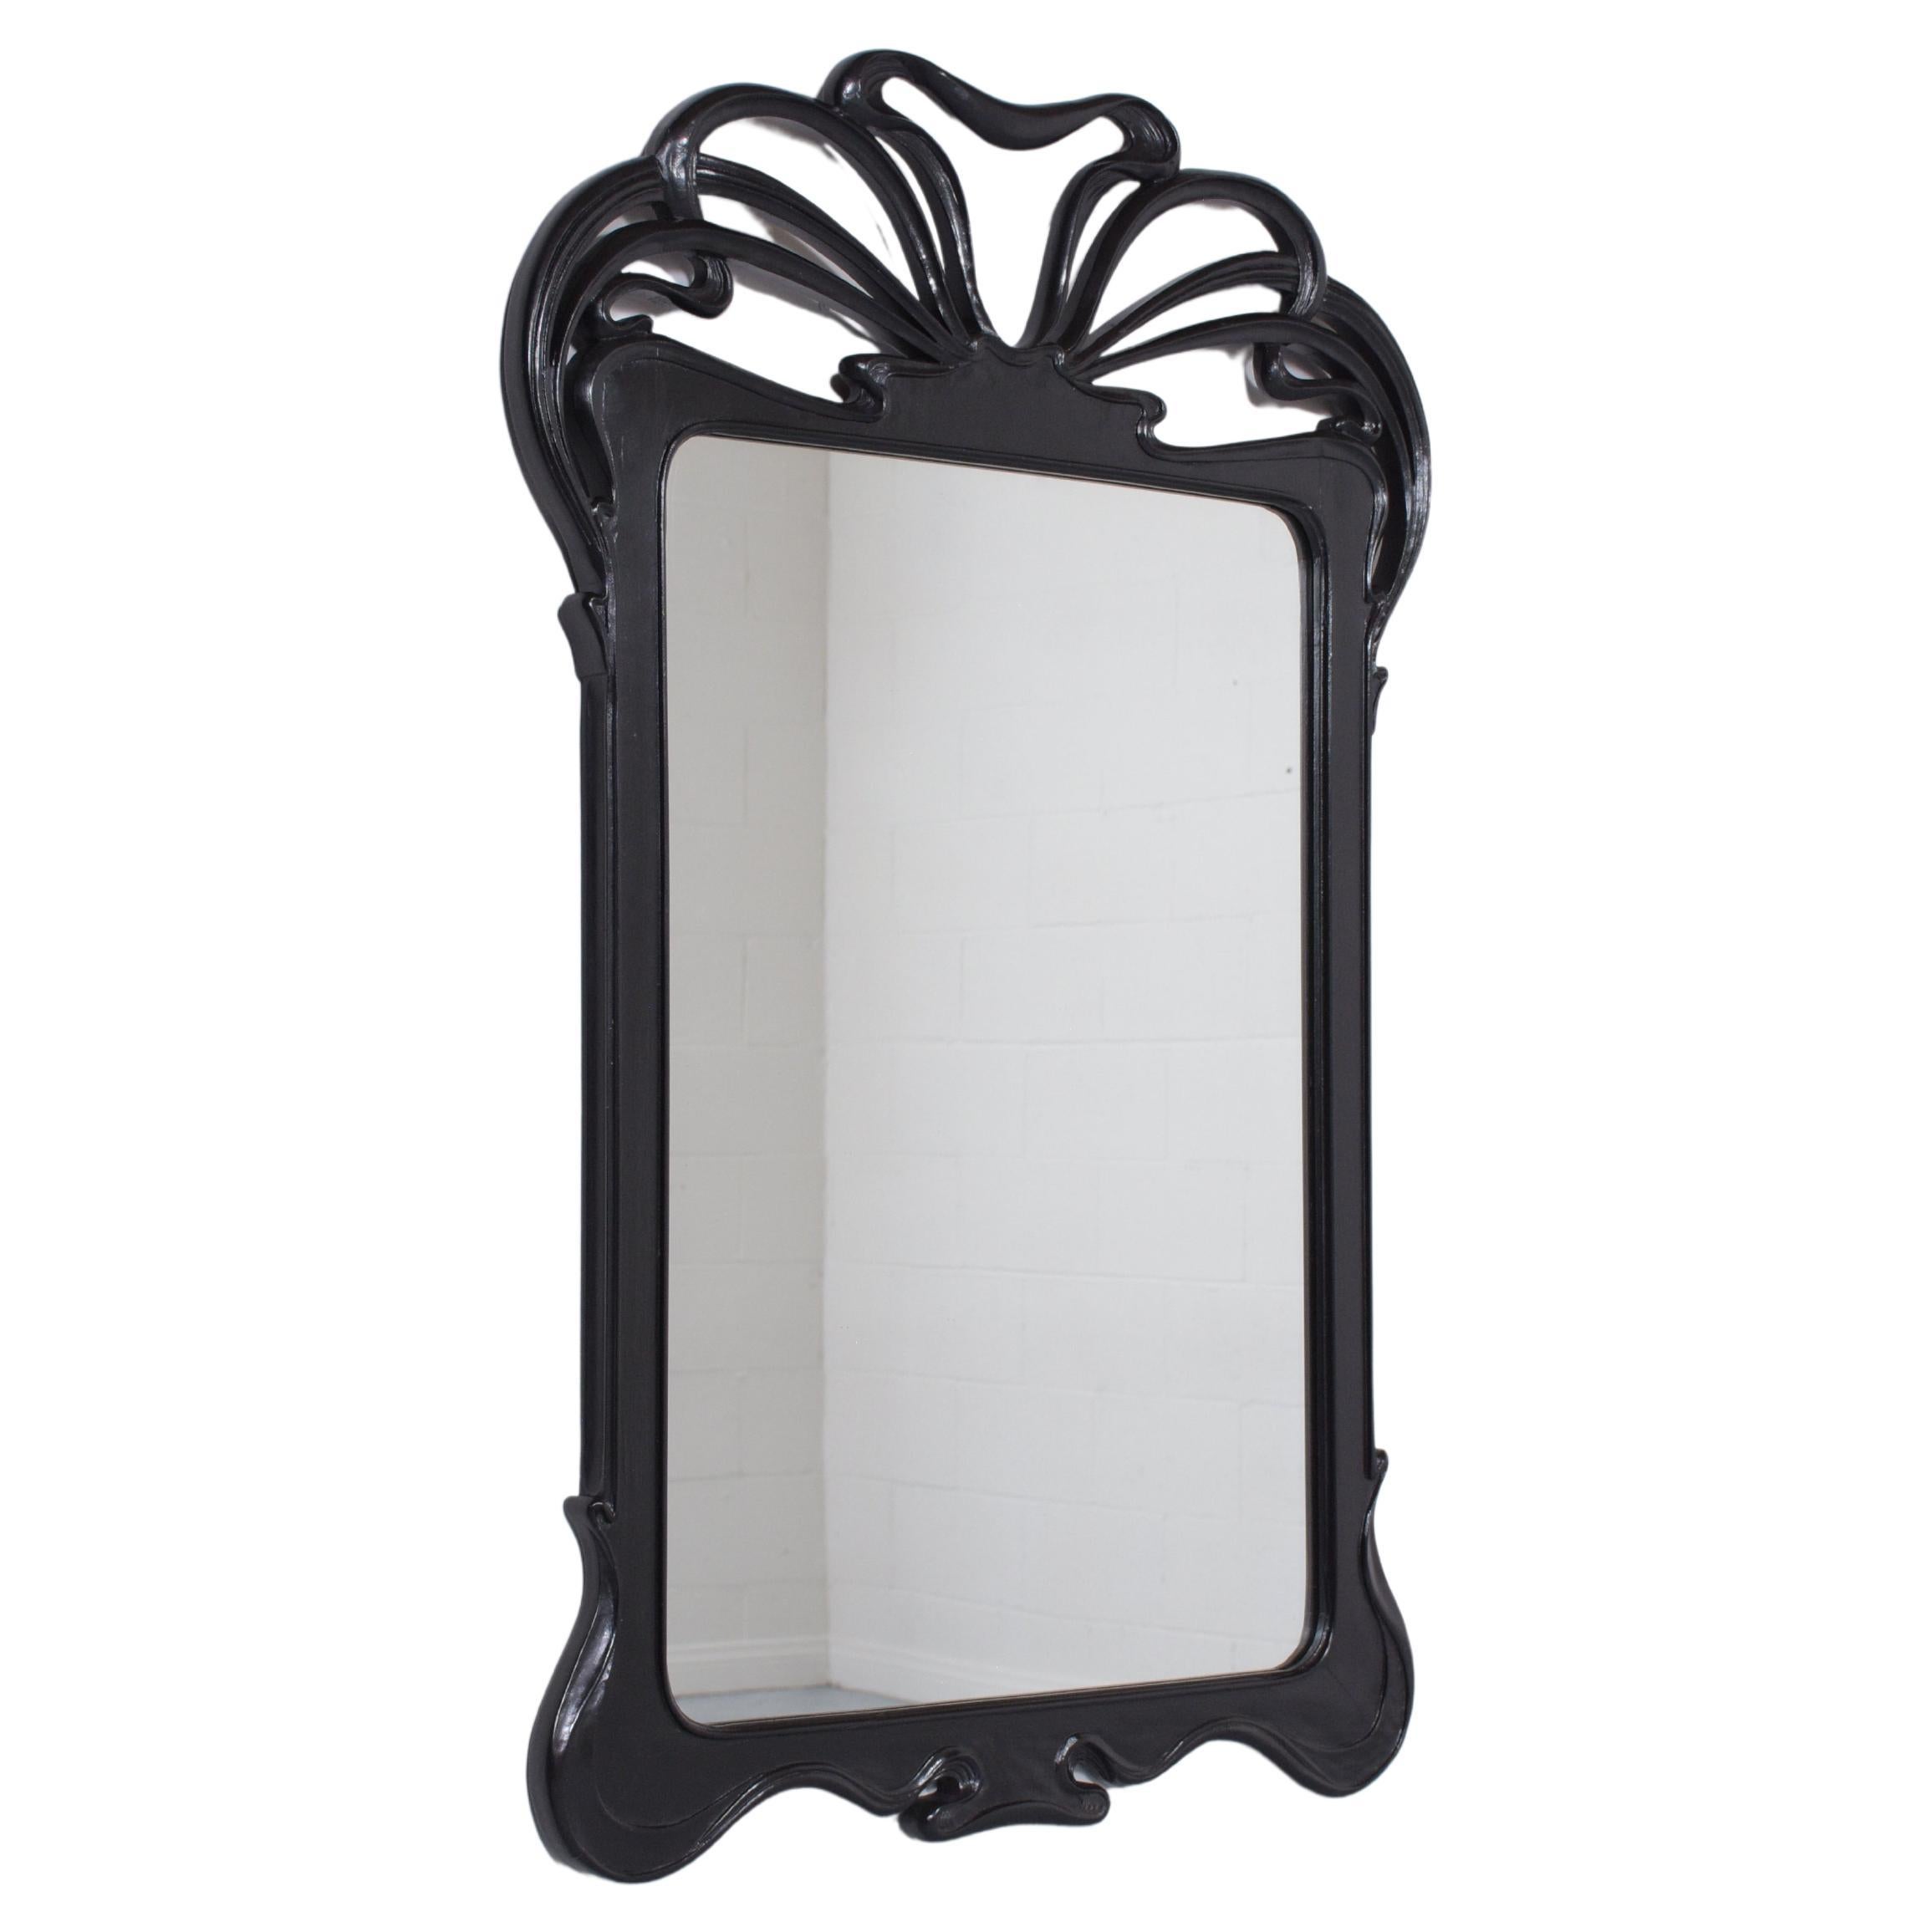 This extraordinary vintage Art Deco-style wall mirror is in excellent condition crafted out of mahogany wood and has been fully restored by our team of expert craftsmen. This mantel mirror features a new painted black color with satin-lacquer